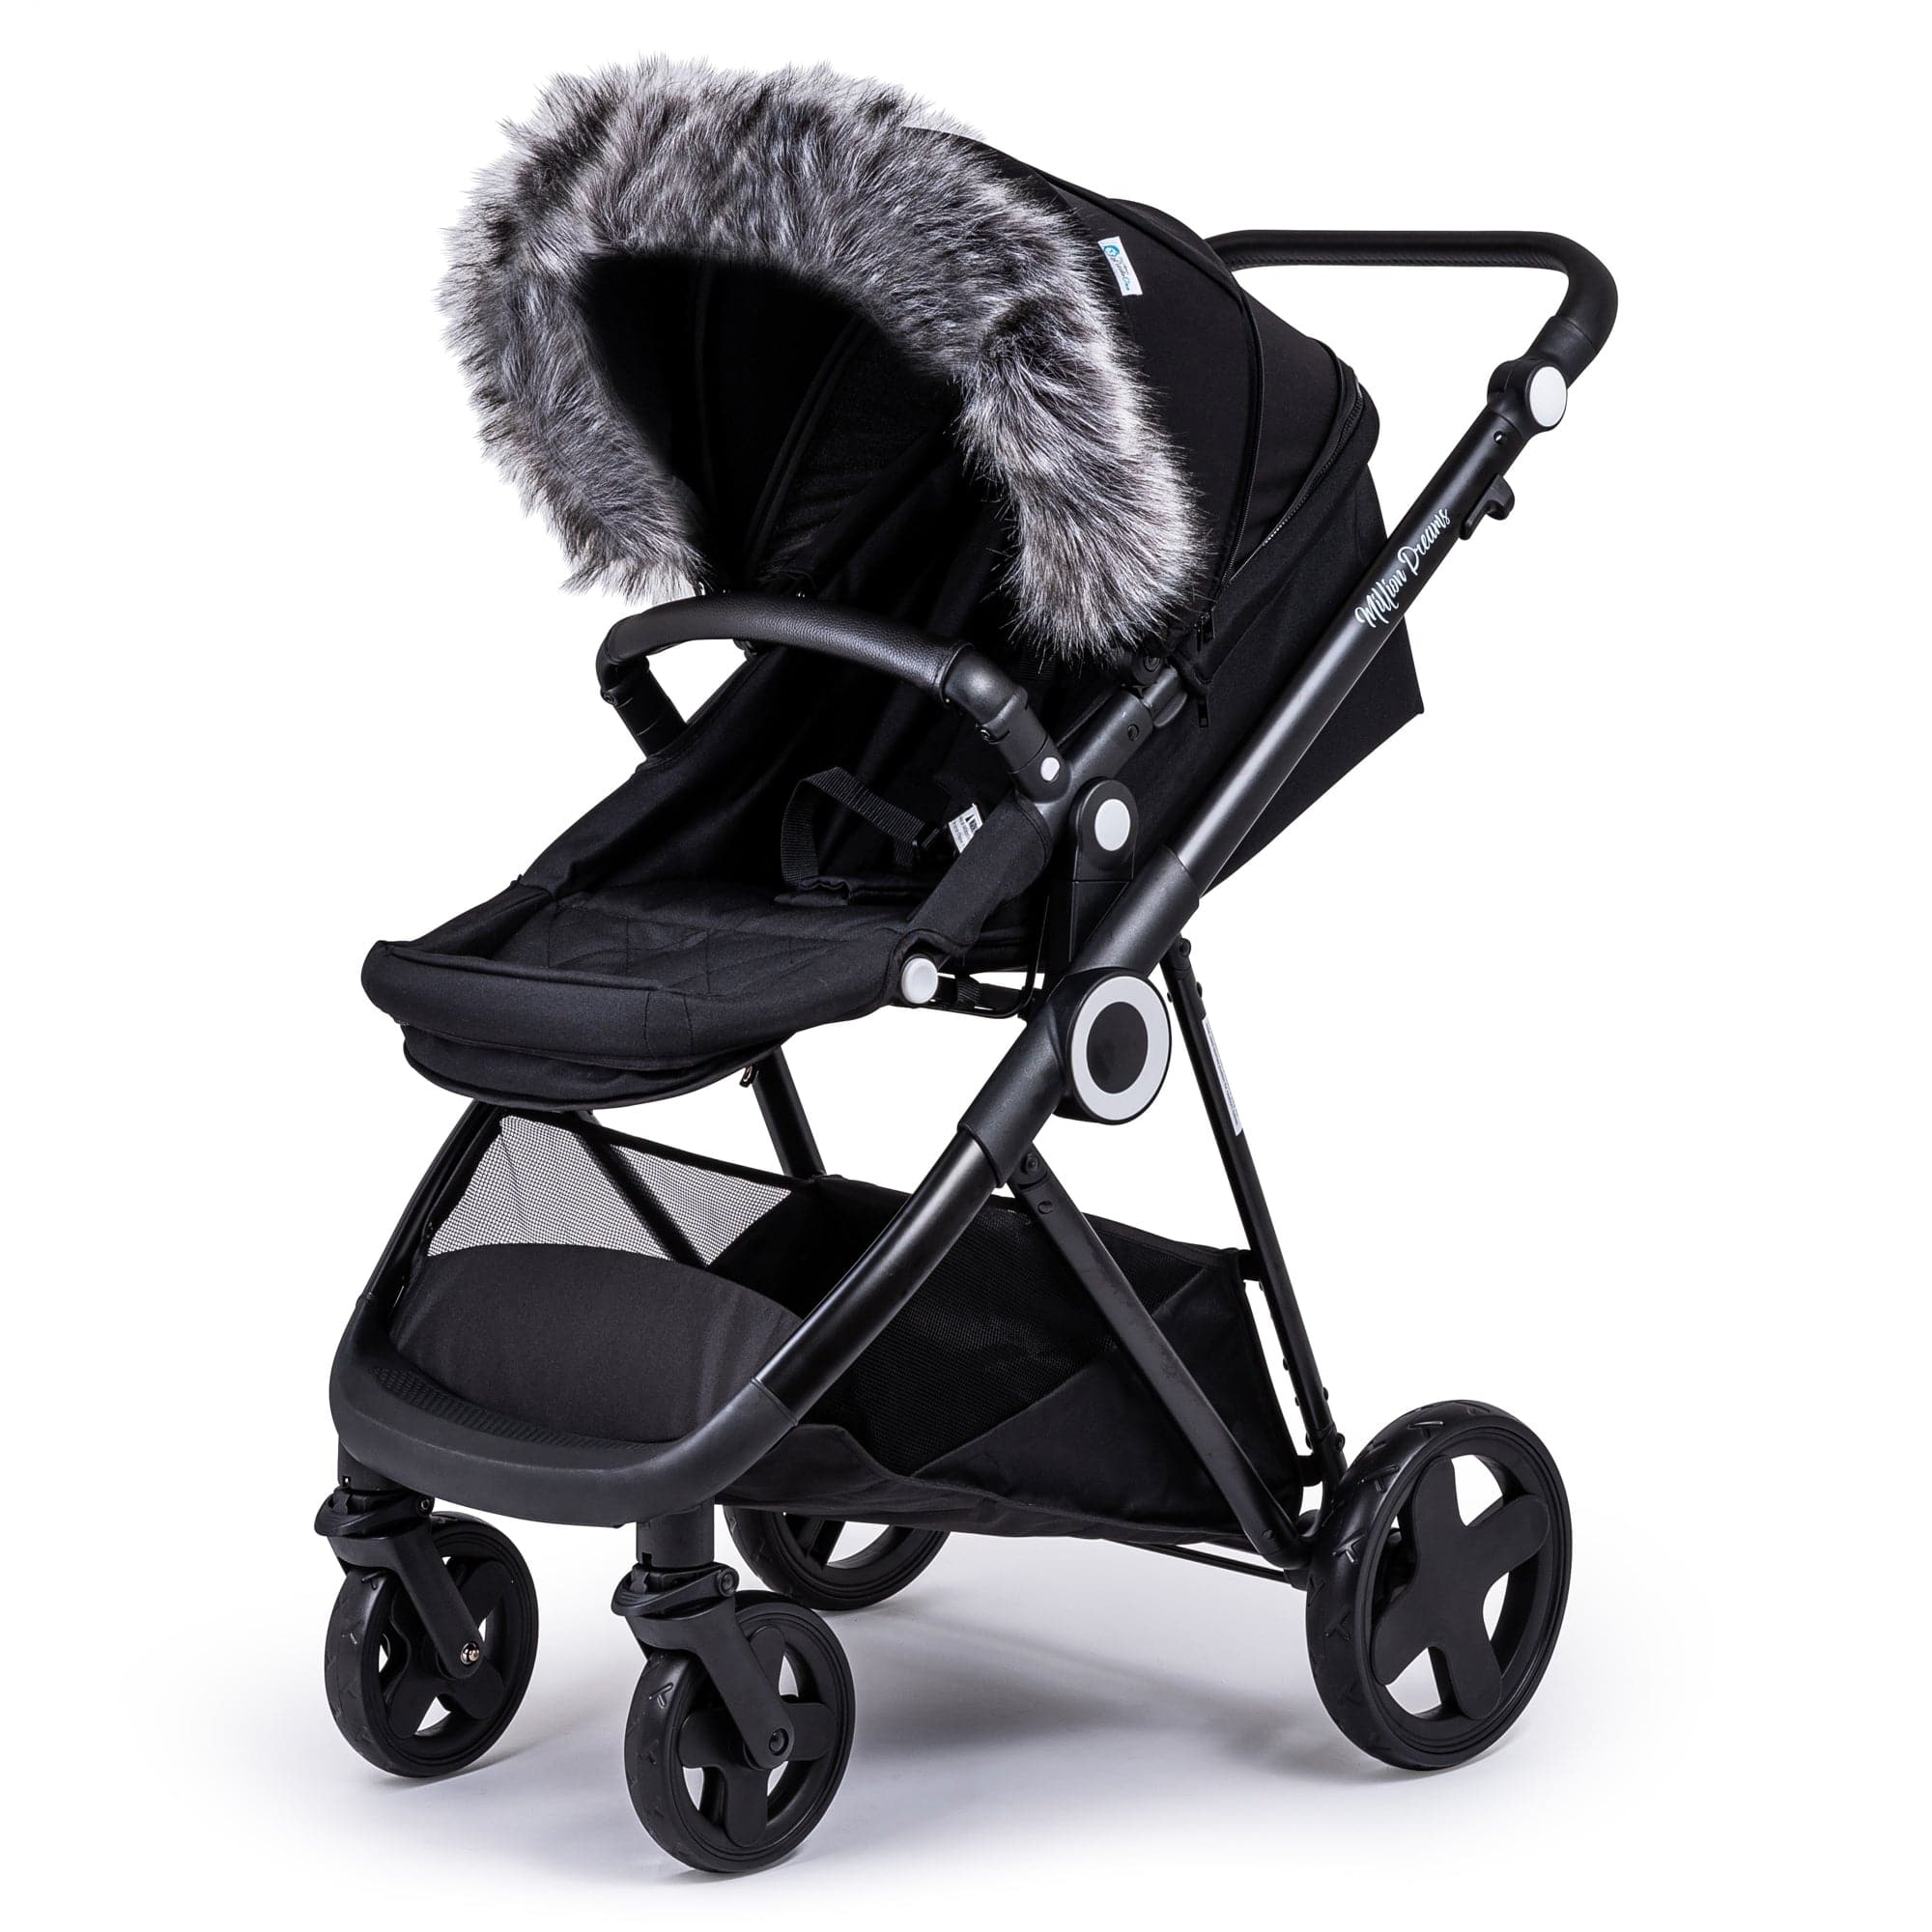 Pram Fur Hood Trim Attachment For Pushchair Compatible with Gb - Dark Grey / Fits All Models | For Your Little One